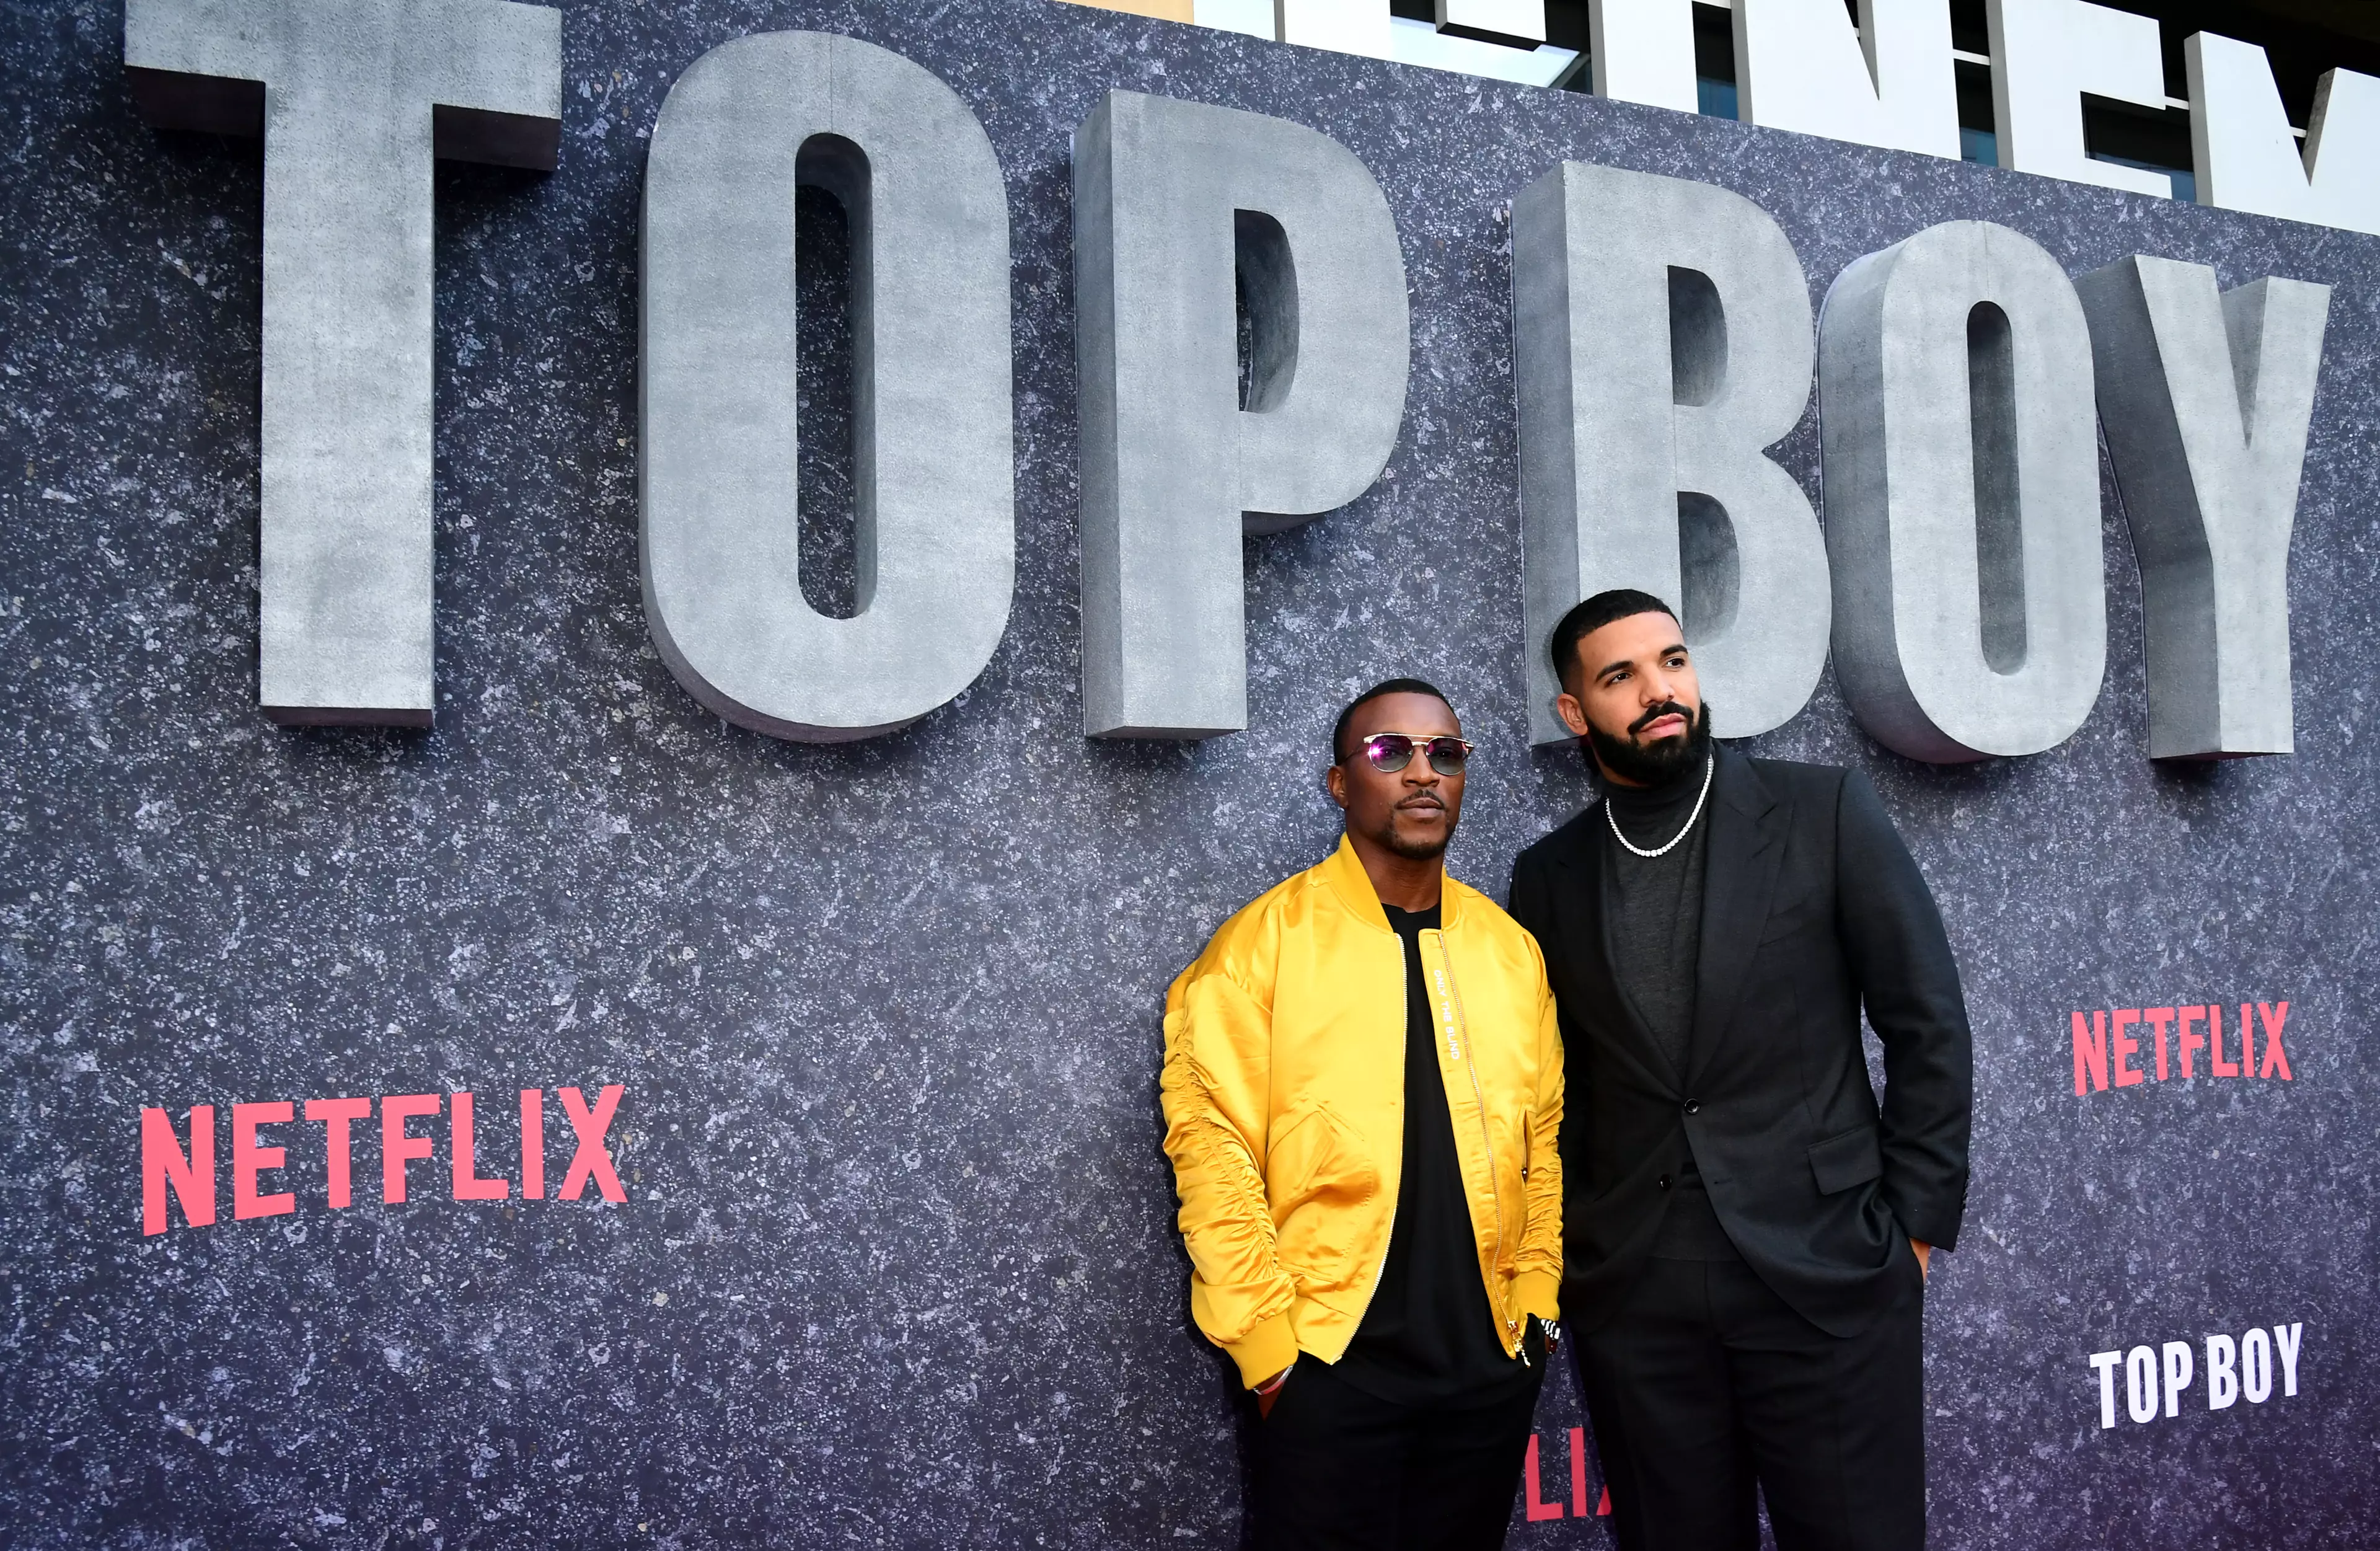 Ashley Walters With Drake at the UK premiere of Top Boy.